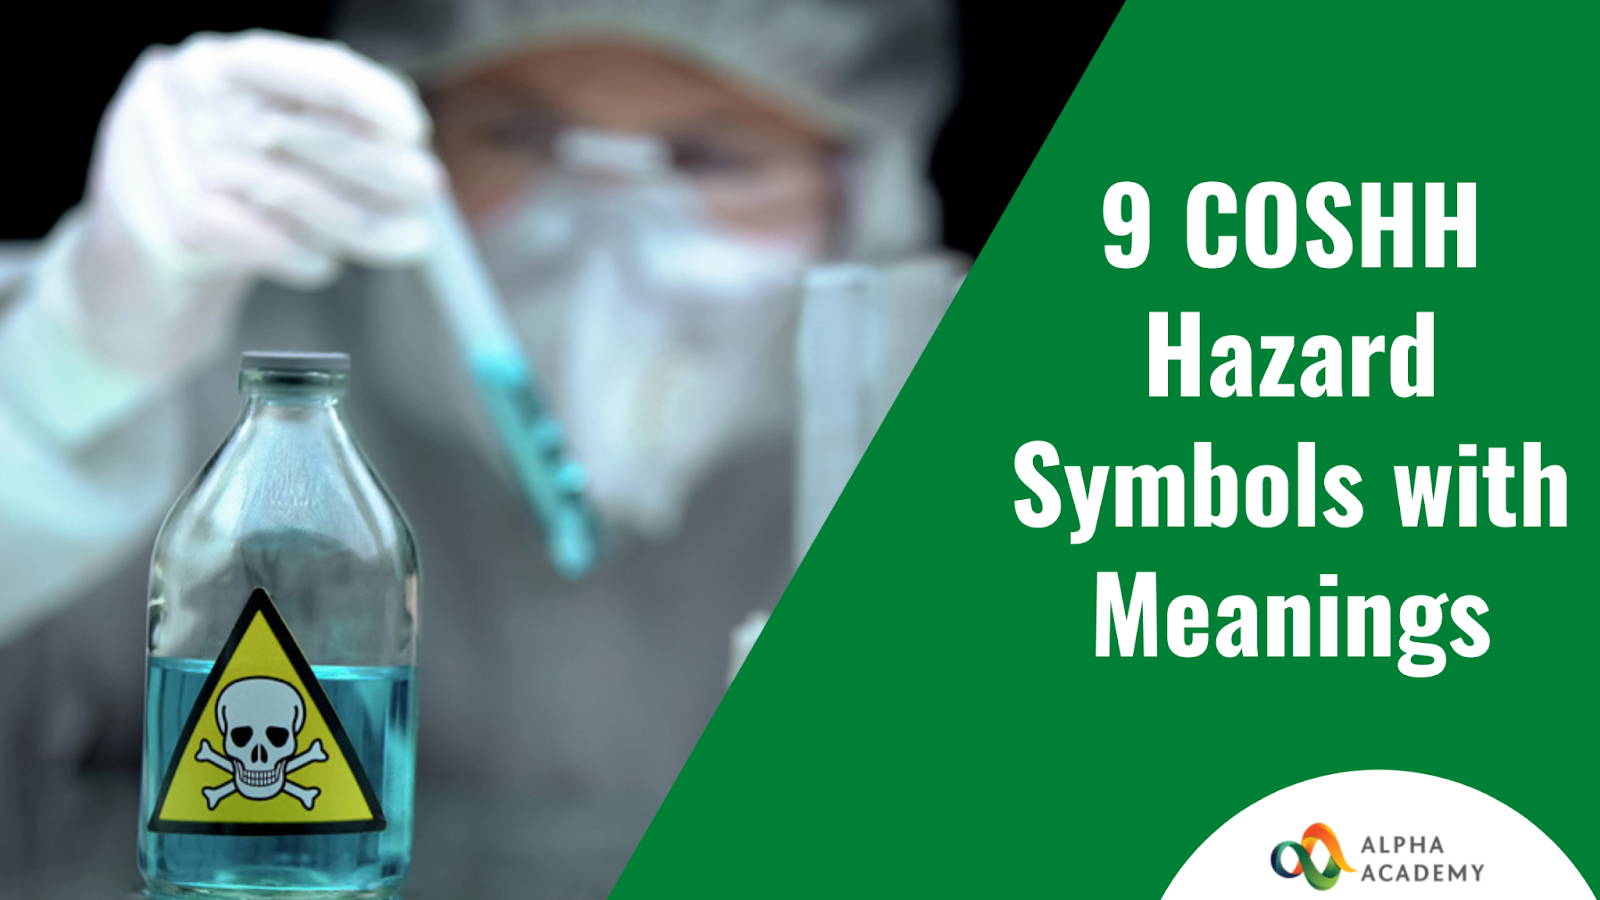 9 COSHH Hazard Symbols with Meanings